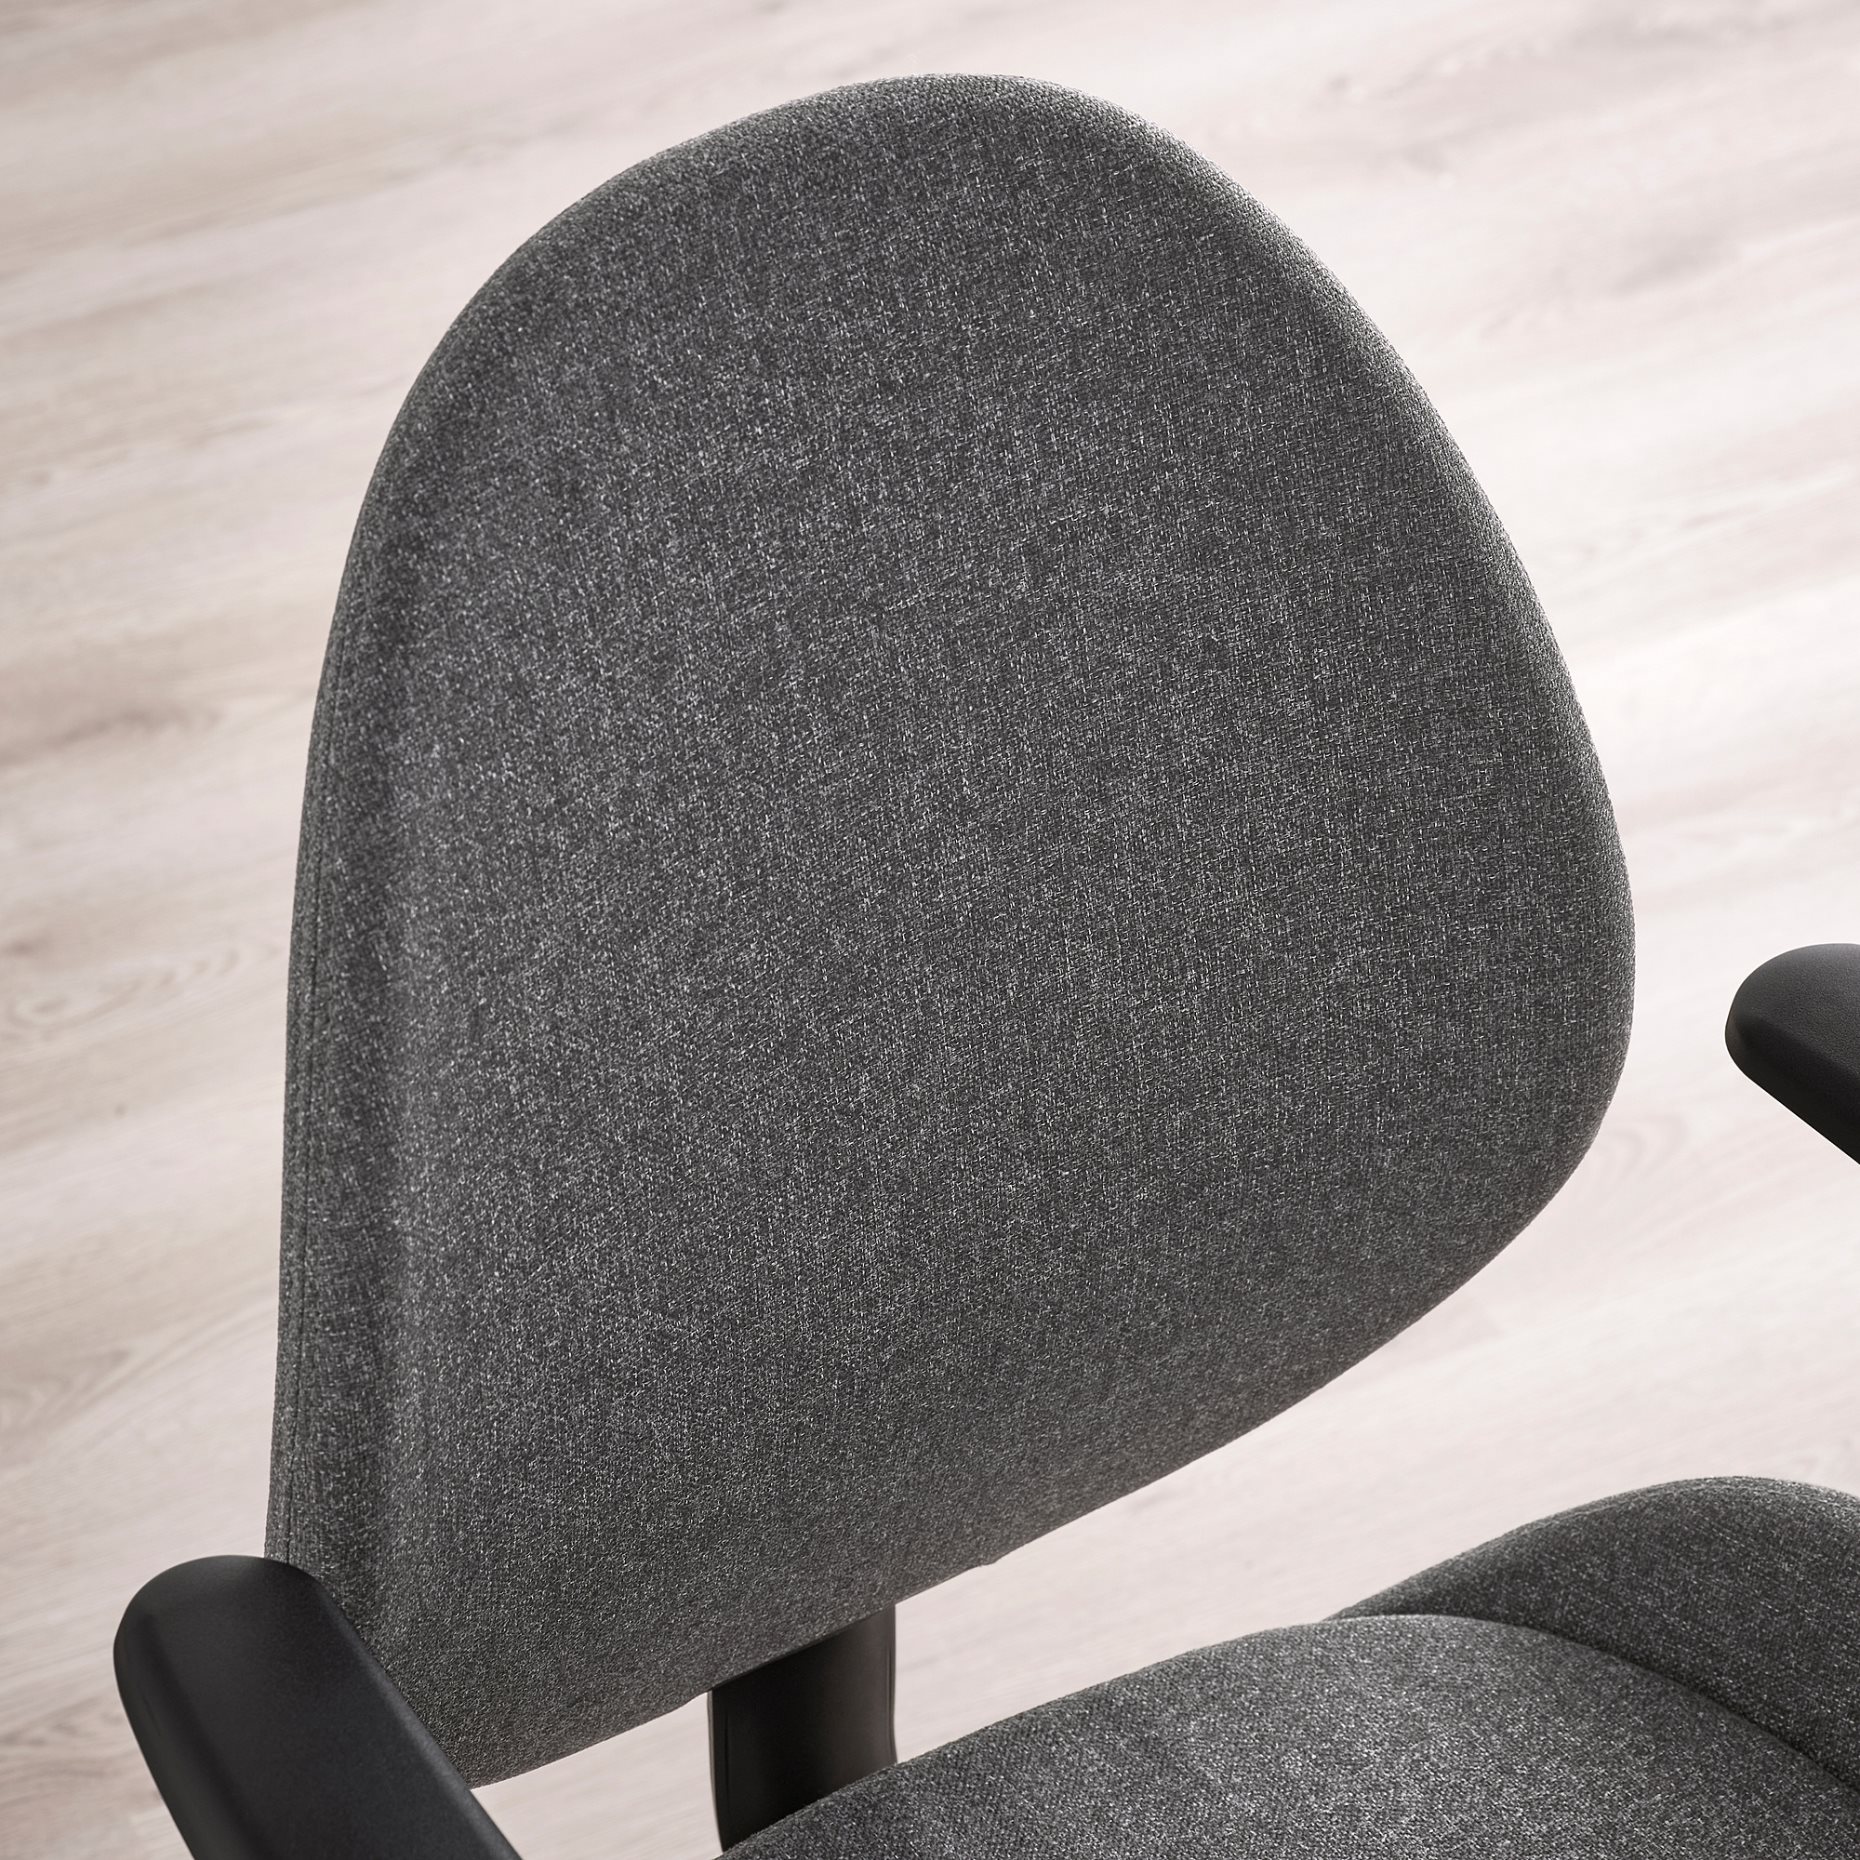 HATTEFJÄLL, office chair with armrests, 305.389.71